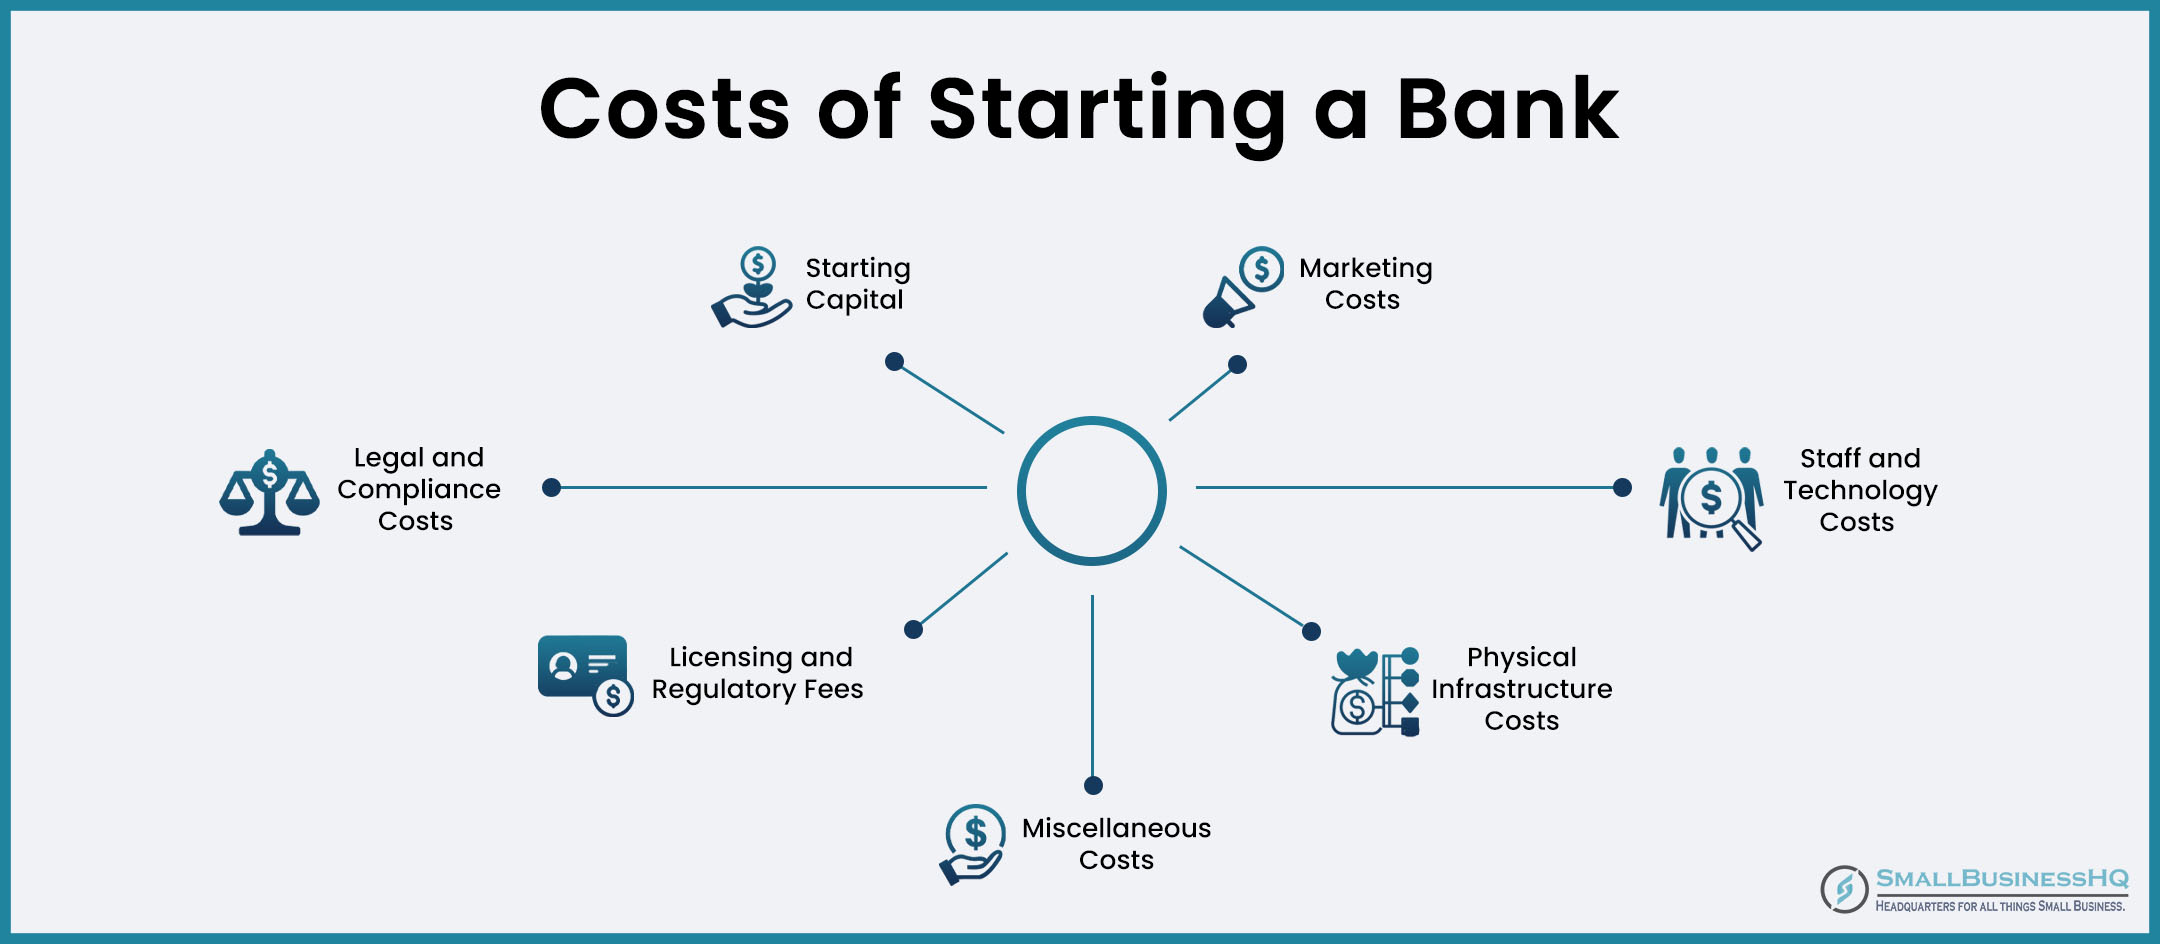 Costs of Starting a Bank